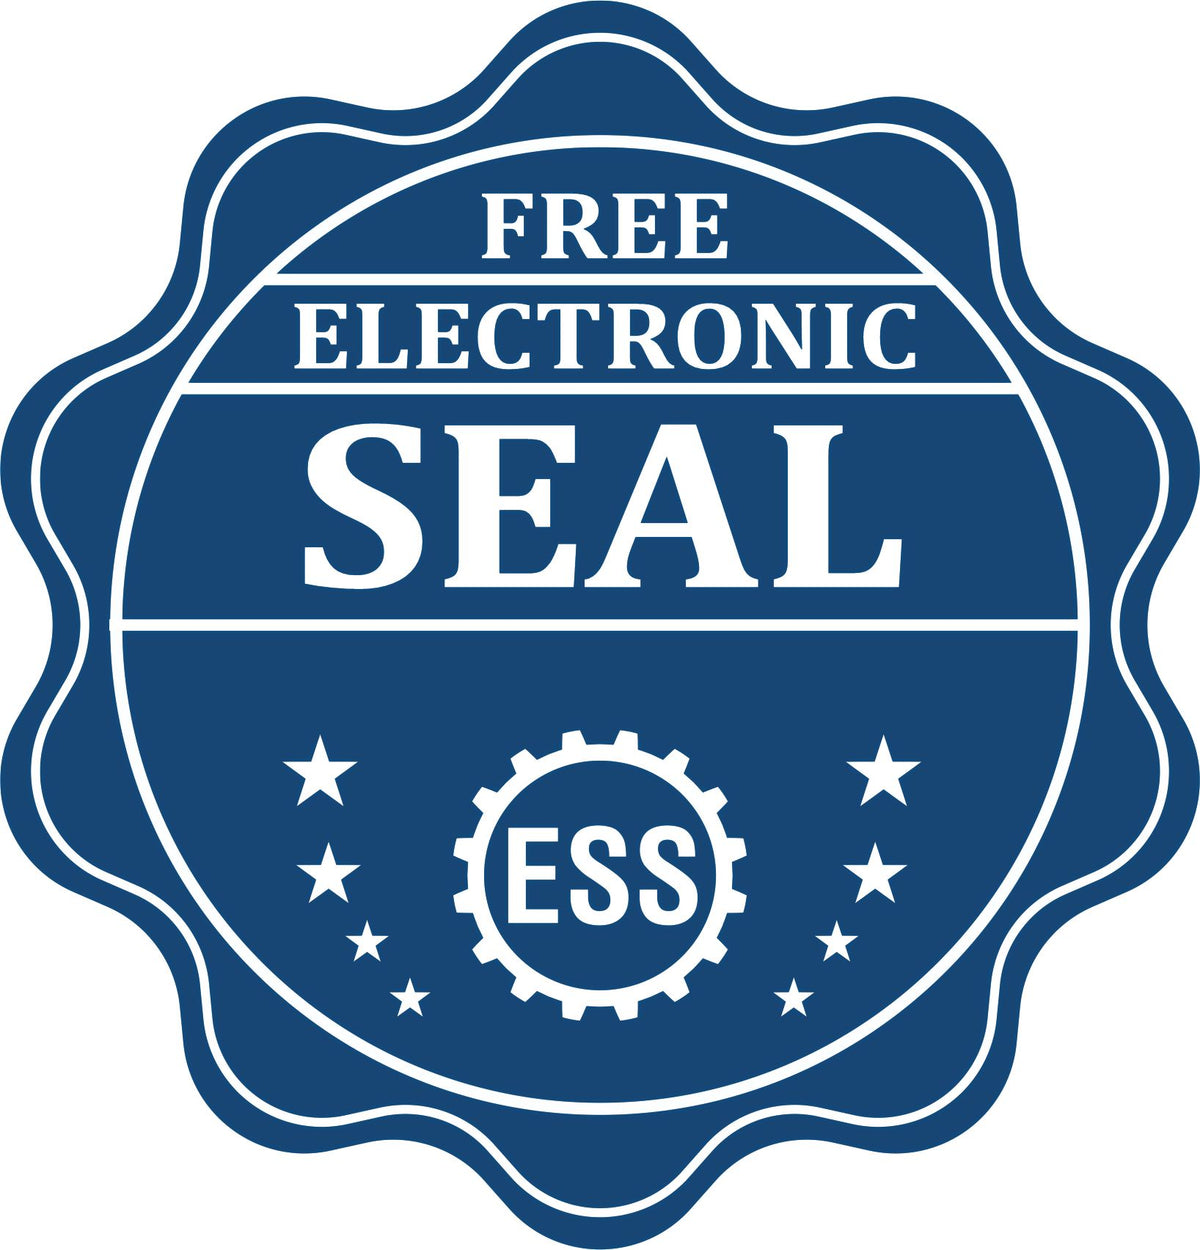 A badge showing a free electronic seal for the Handheld Missouri Professional Geologist Embosser with stars and the ESS gear on the emblem.